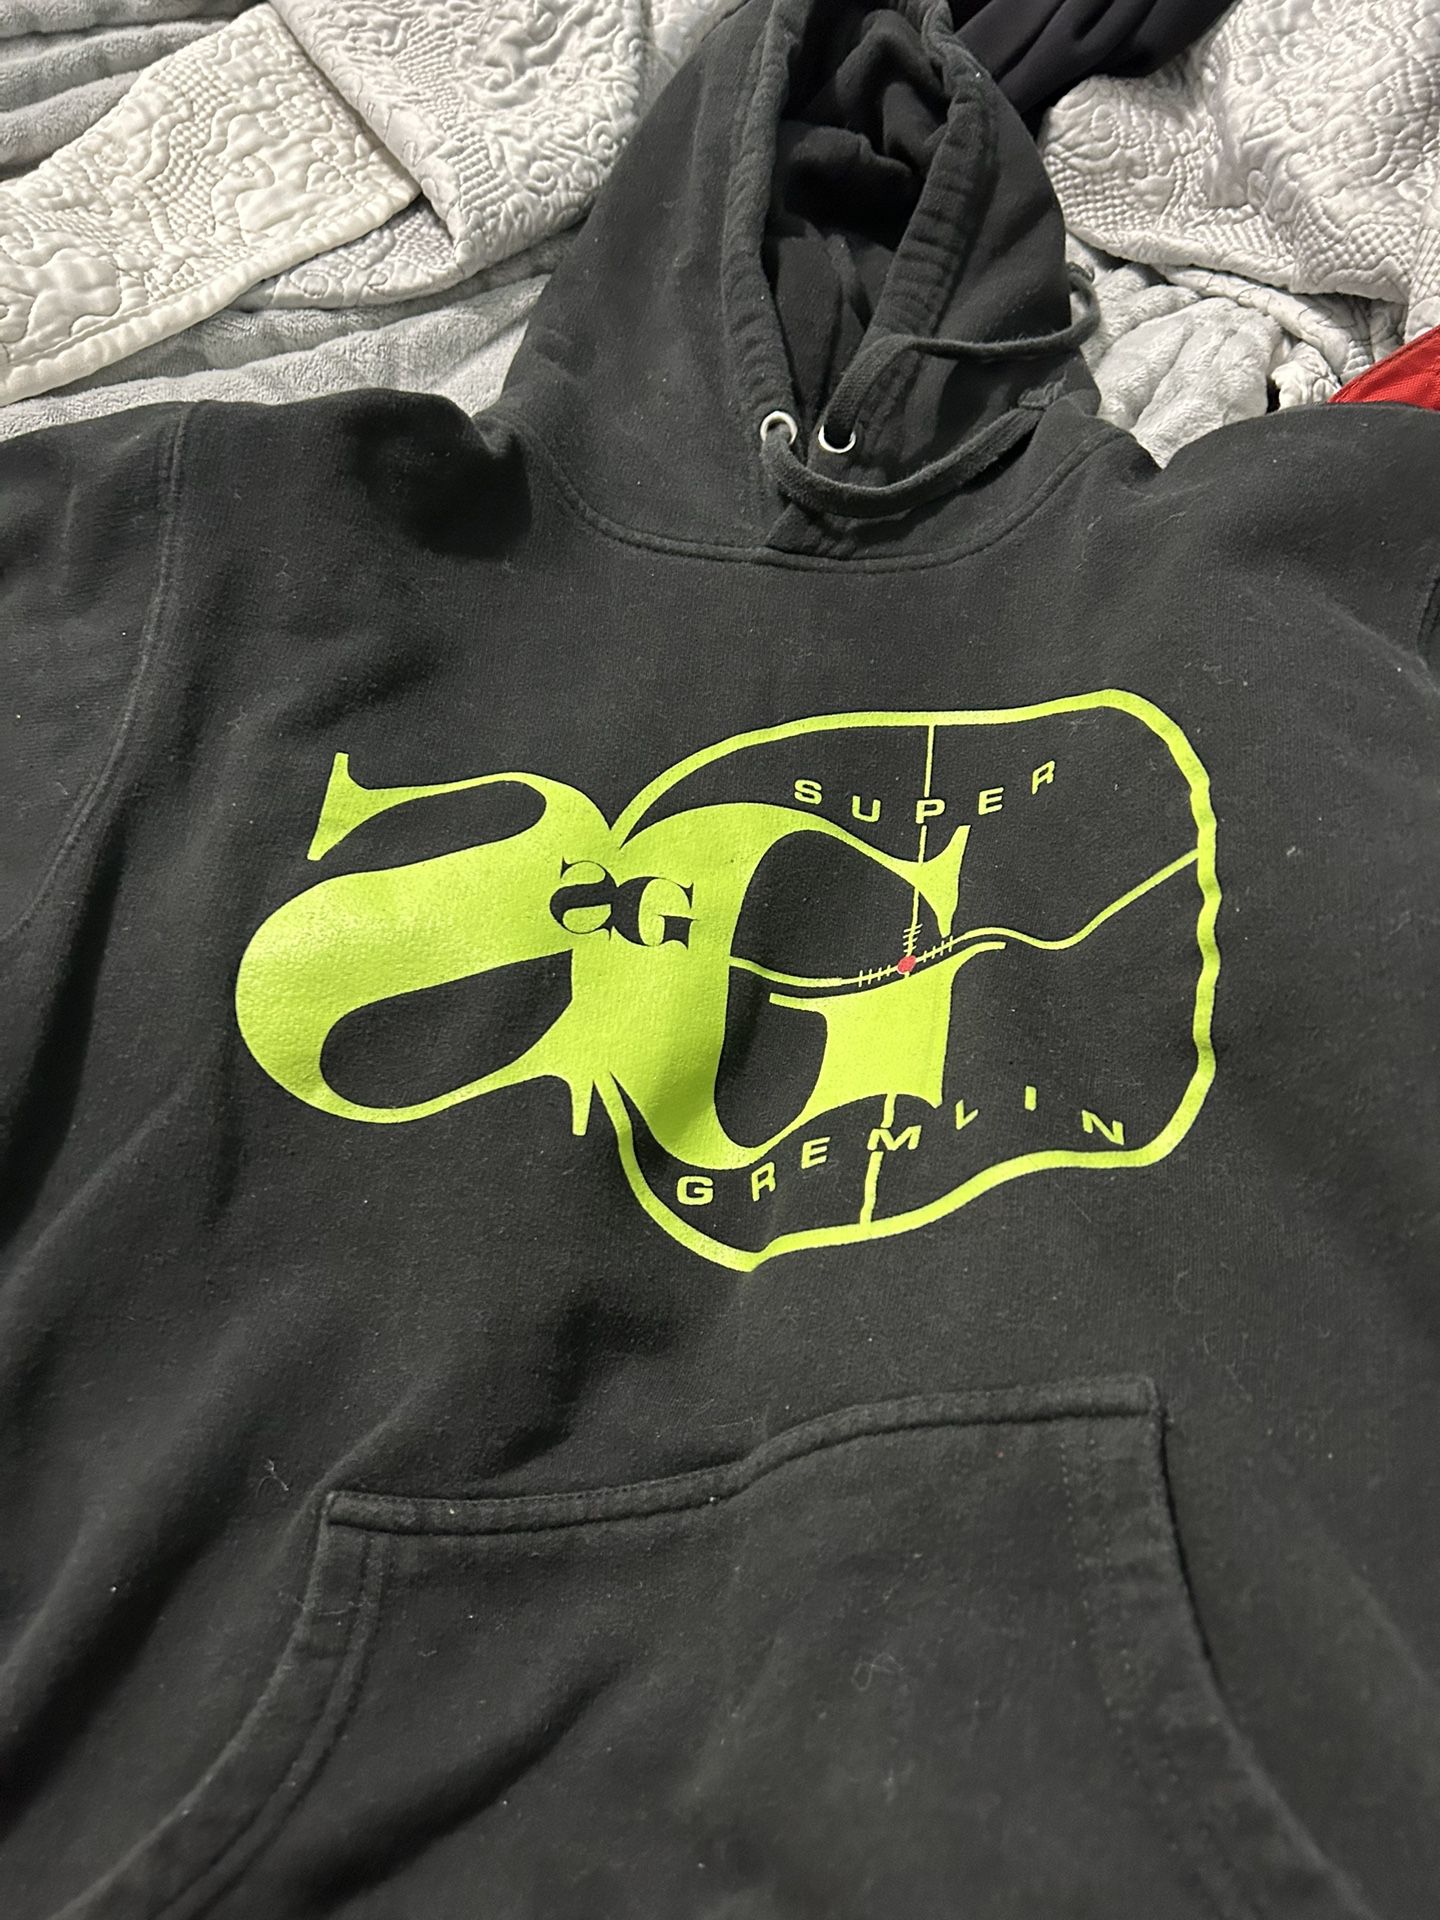 Singer Gang Hoodie Limited Edition